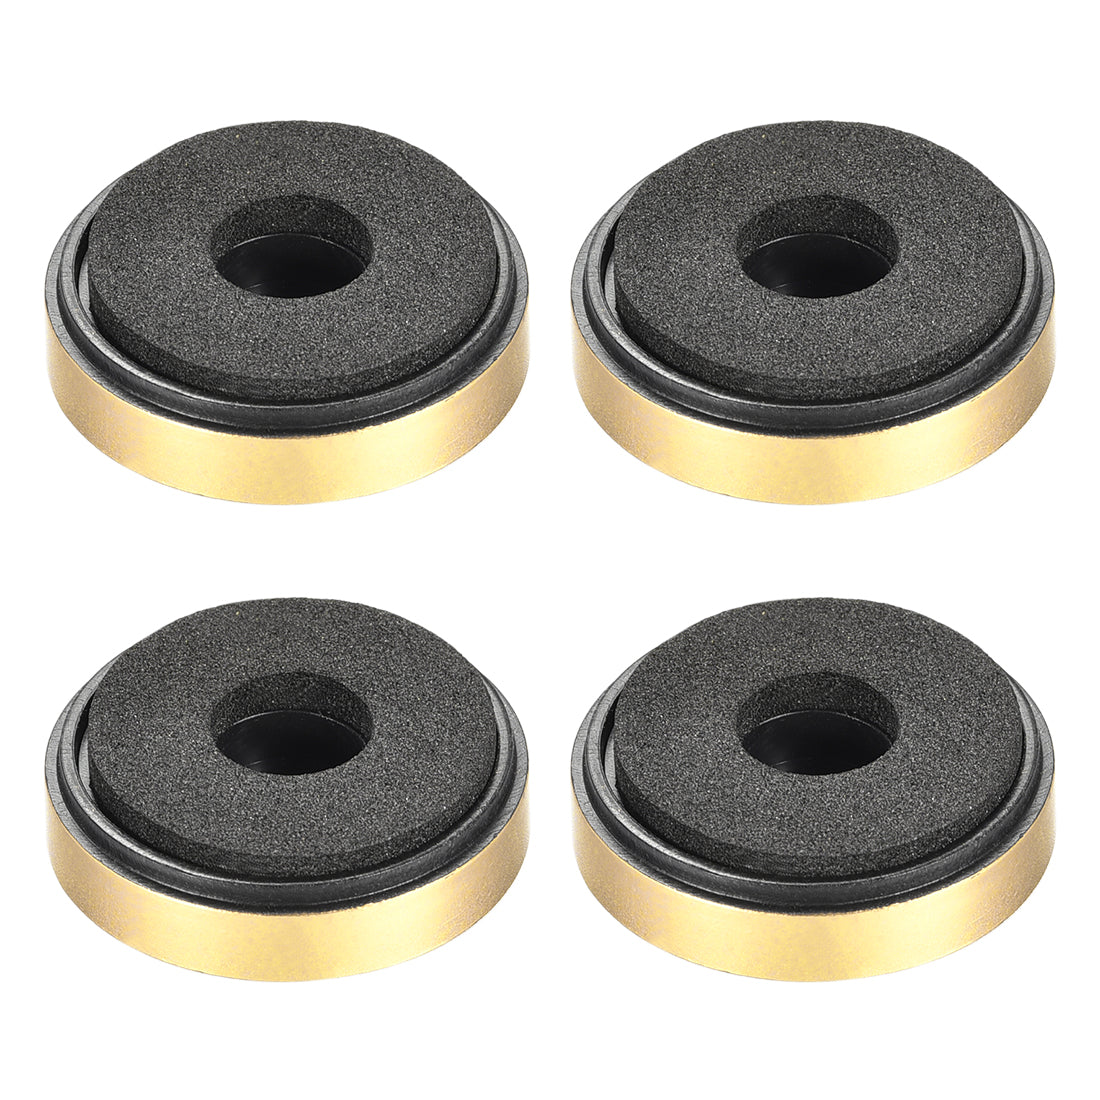 uxcell Uxcell 4 Pcs D30xH8mm Plastic Feet Anti-Vibration Base Pad Stand for Speaker Guitar Amplifier HiFi Gold Tone